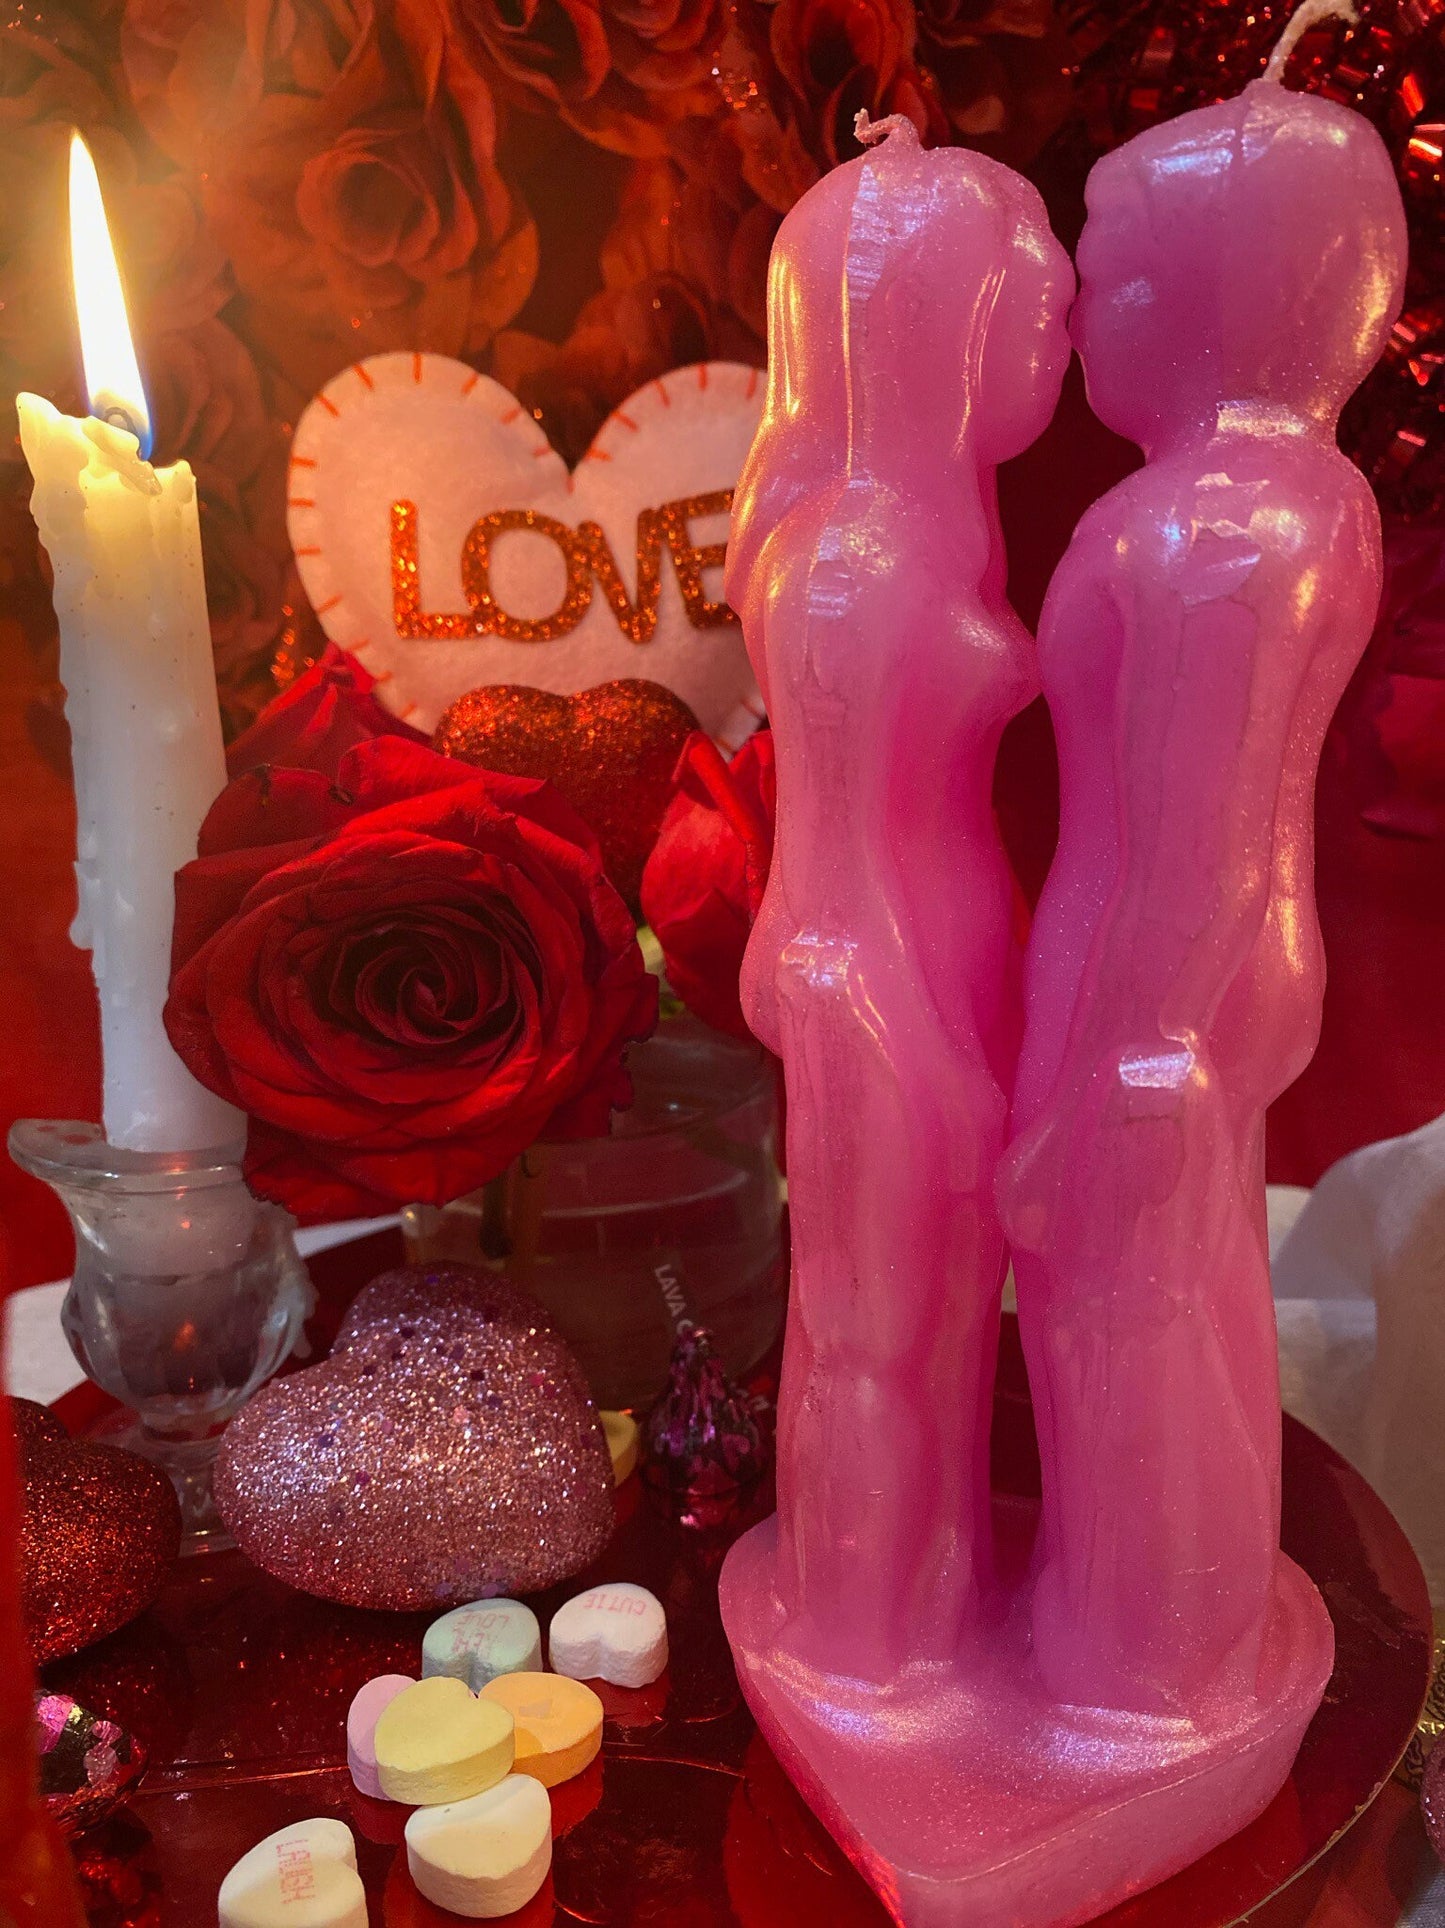 Male and Female Lovers Candle + Adam & Eve + Passion + Binding + Marriage + Friendship